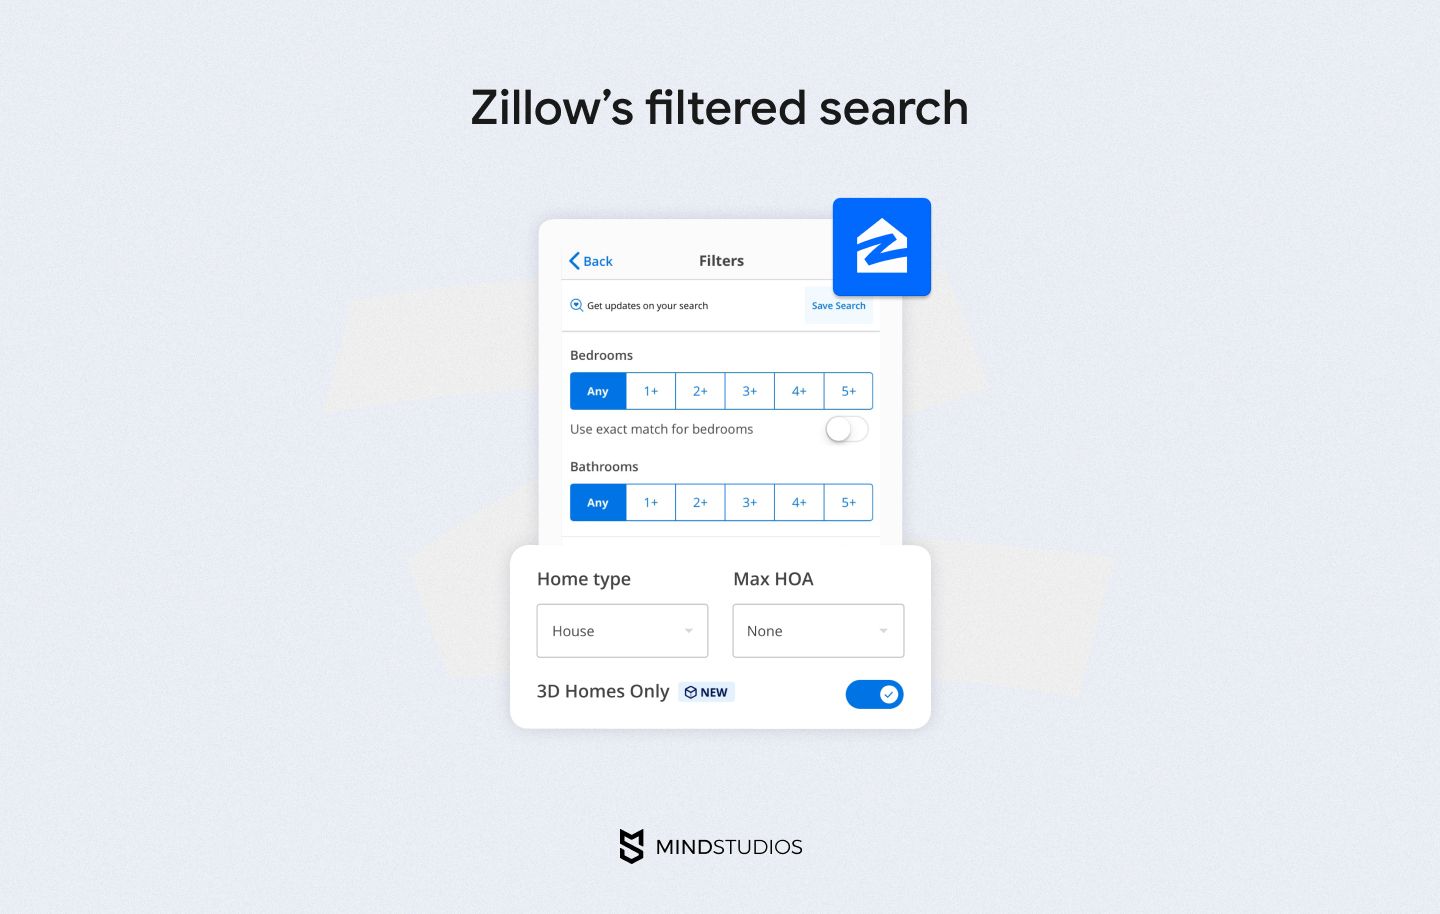 Filtered search